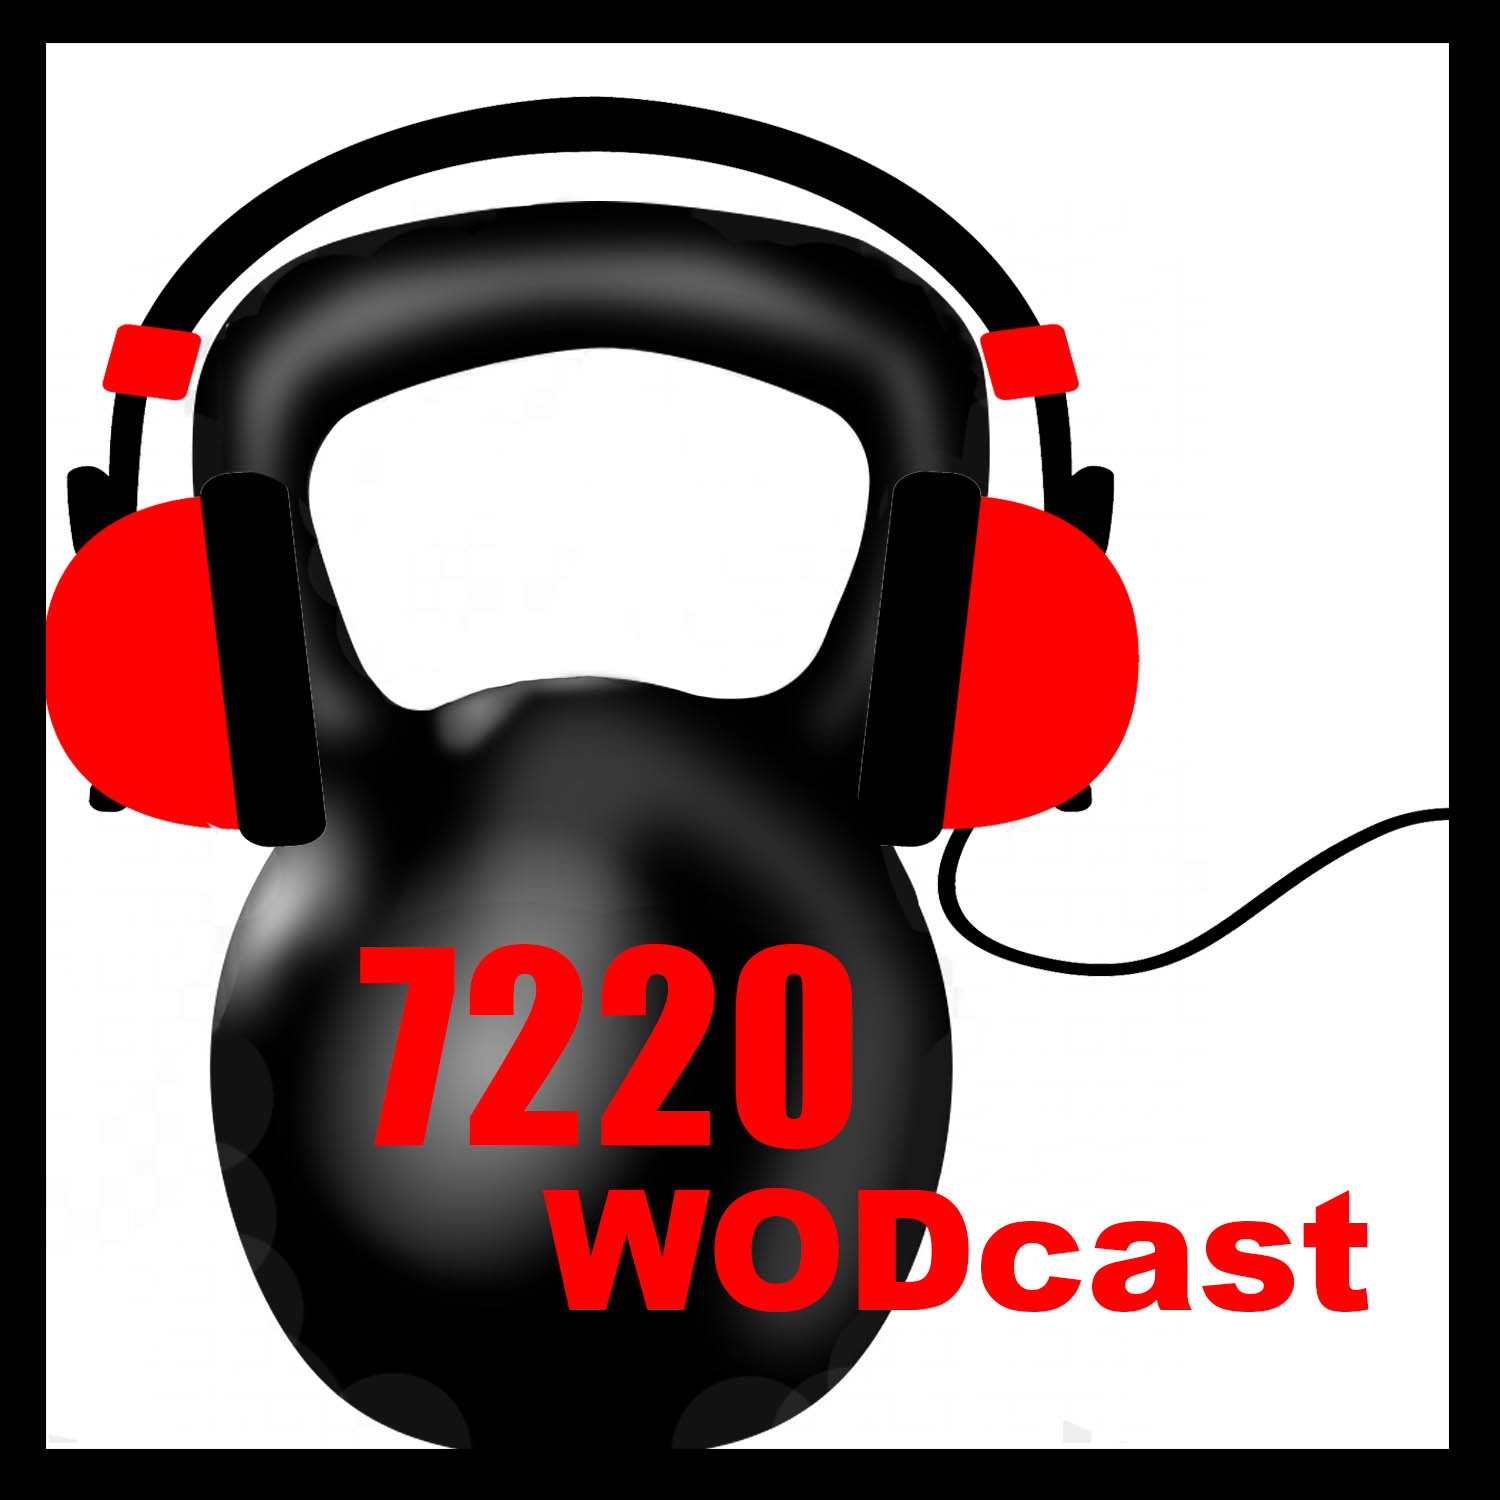 The 7220 WODcast